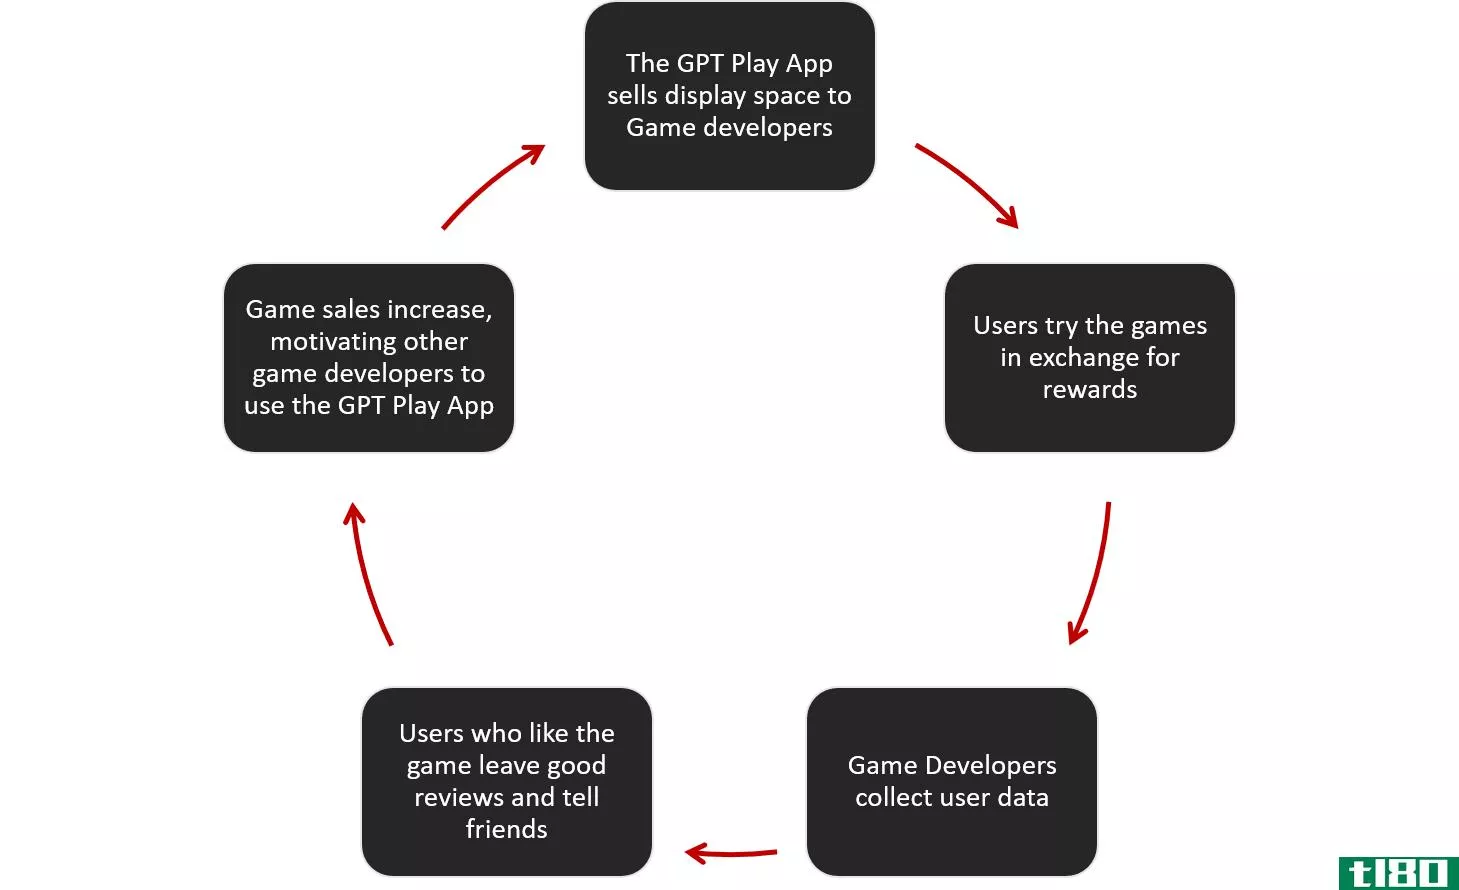 The business model of GPT-Play apps: Step 1: the GPT-Play App sells display space to game developers. Step 2: Users play the games in exchange for rewards. Step 3: Game Developers collect data from the users. Step 4: Users who like the game leave good reviews and share it with friends. Step 5: Game sales increase, motivating other developers to use the GPT App.